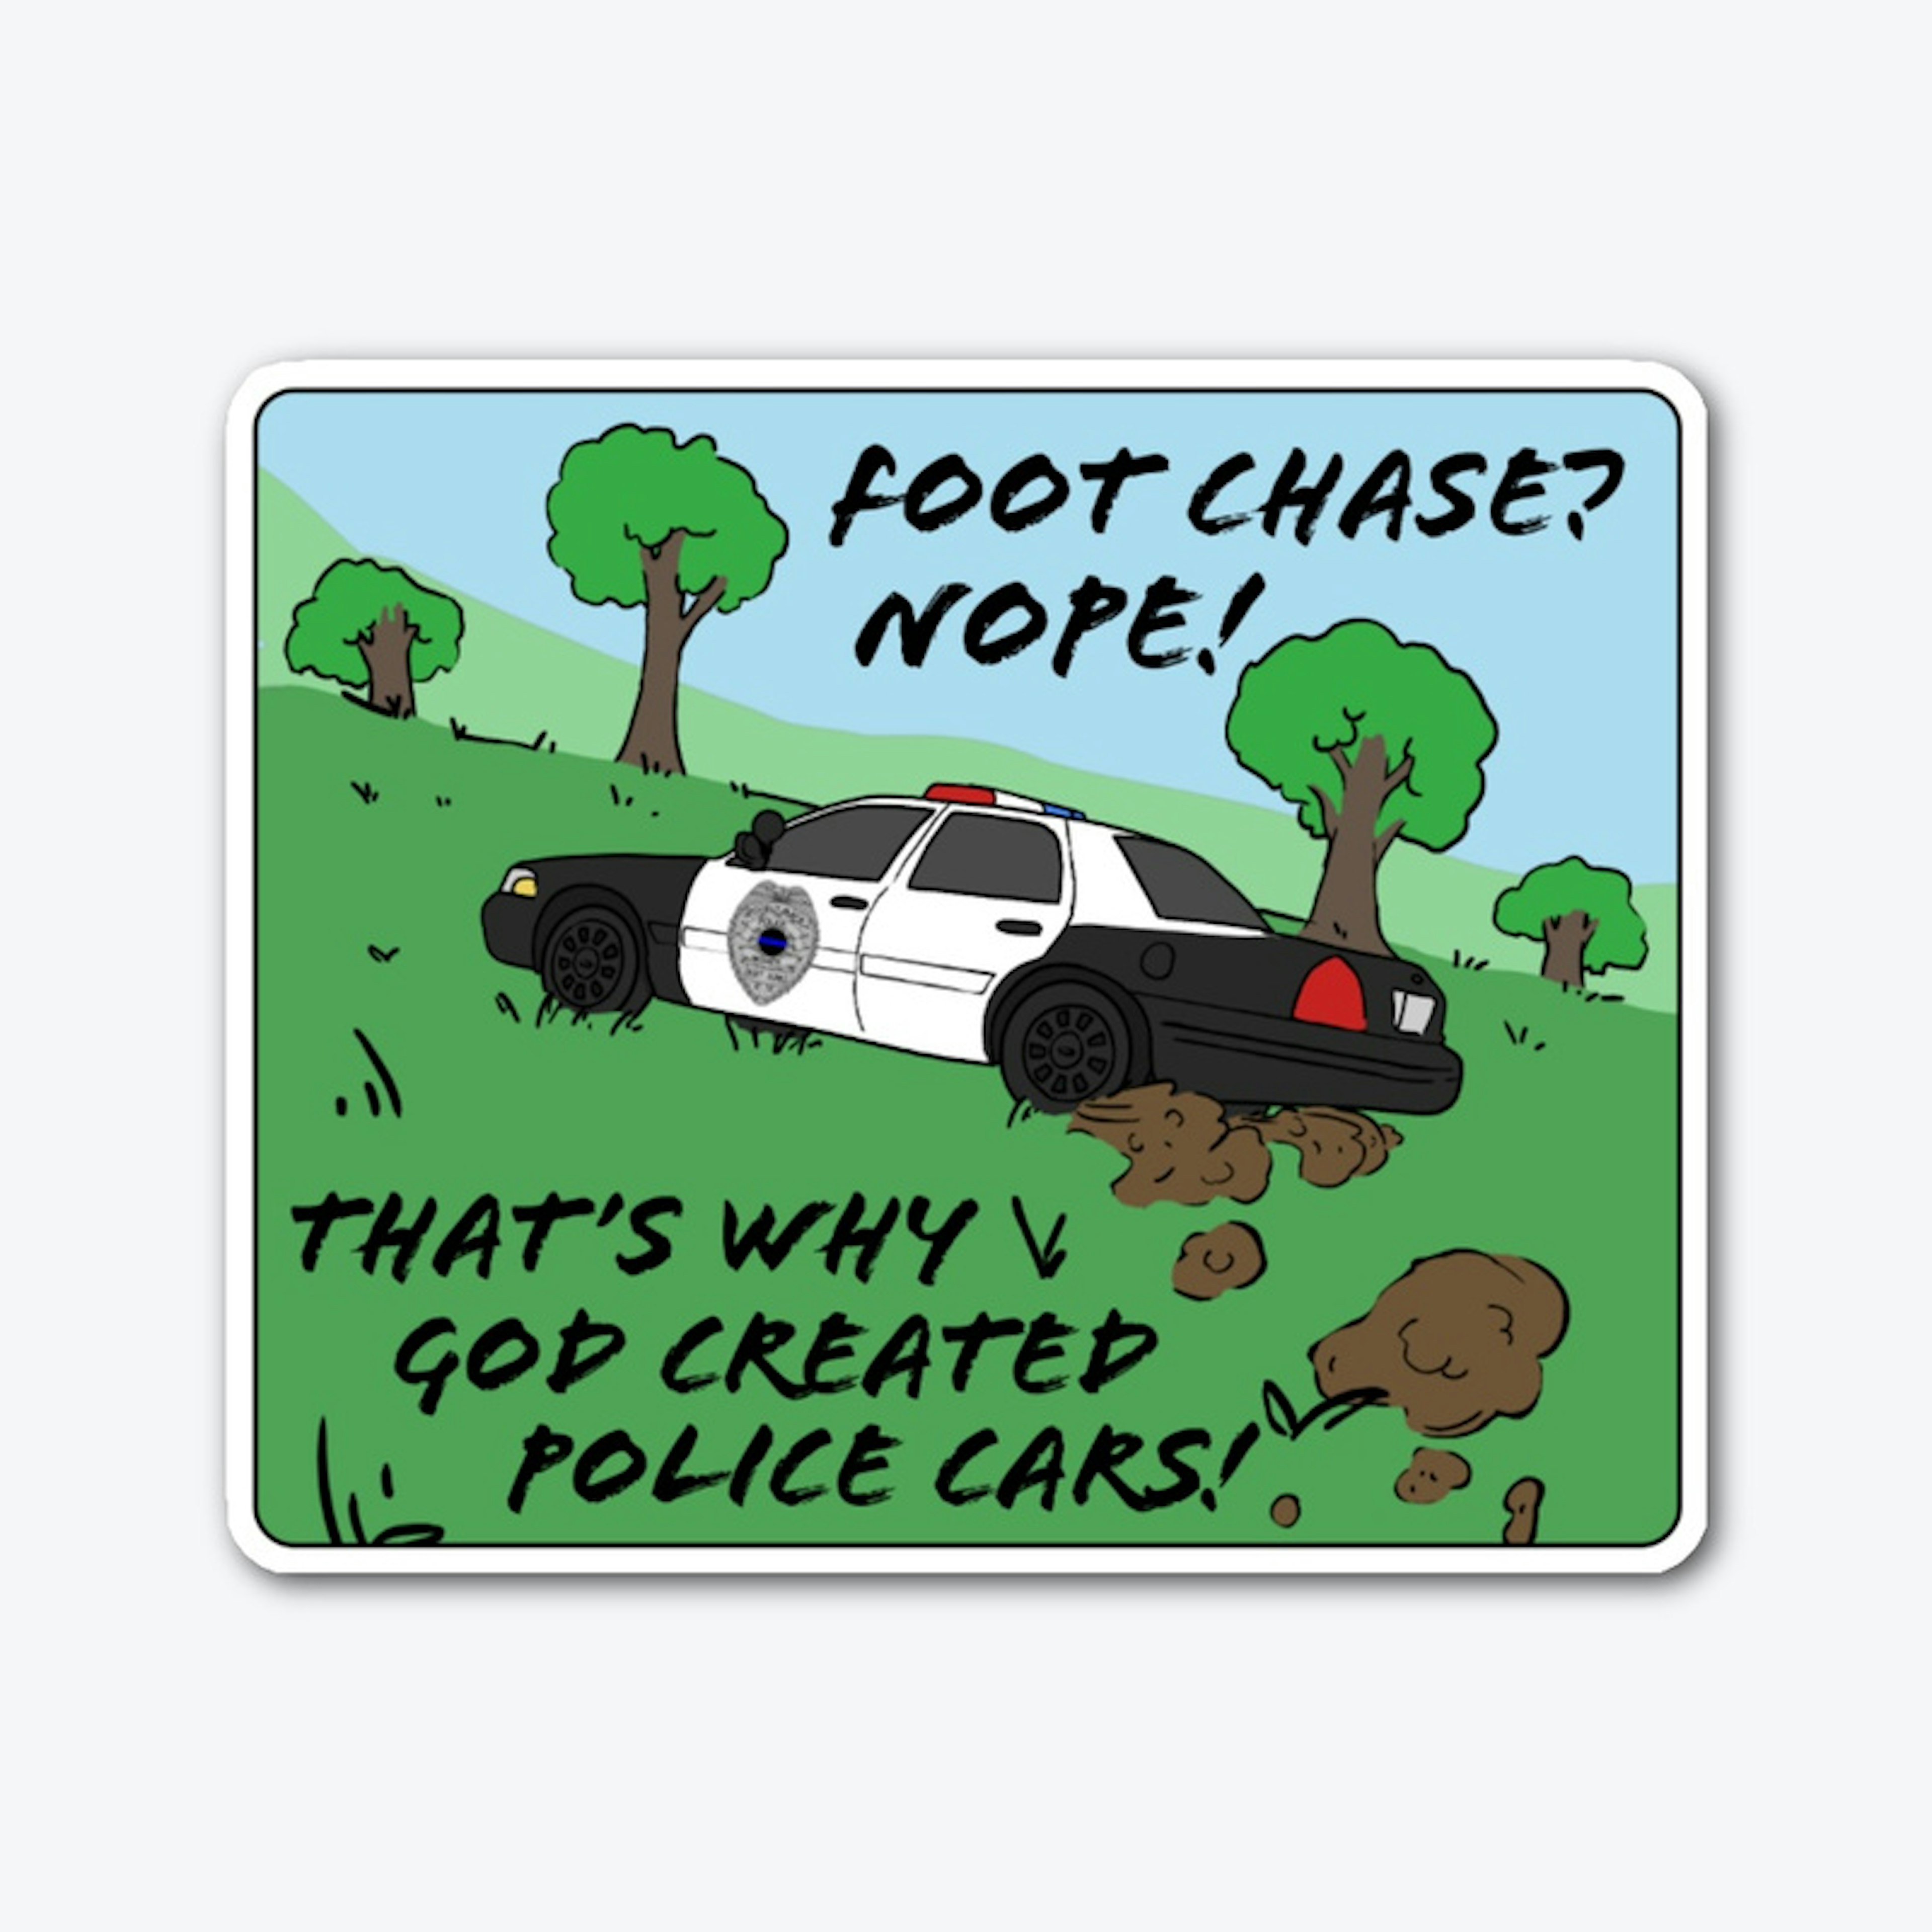 Foot chase?